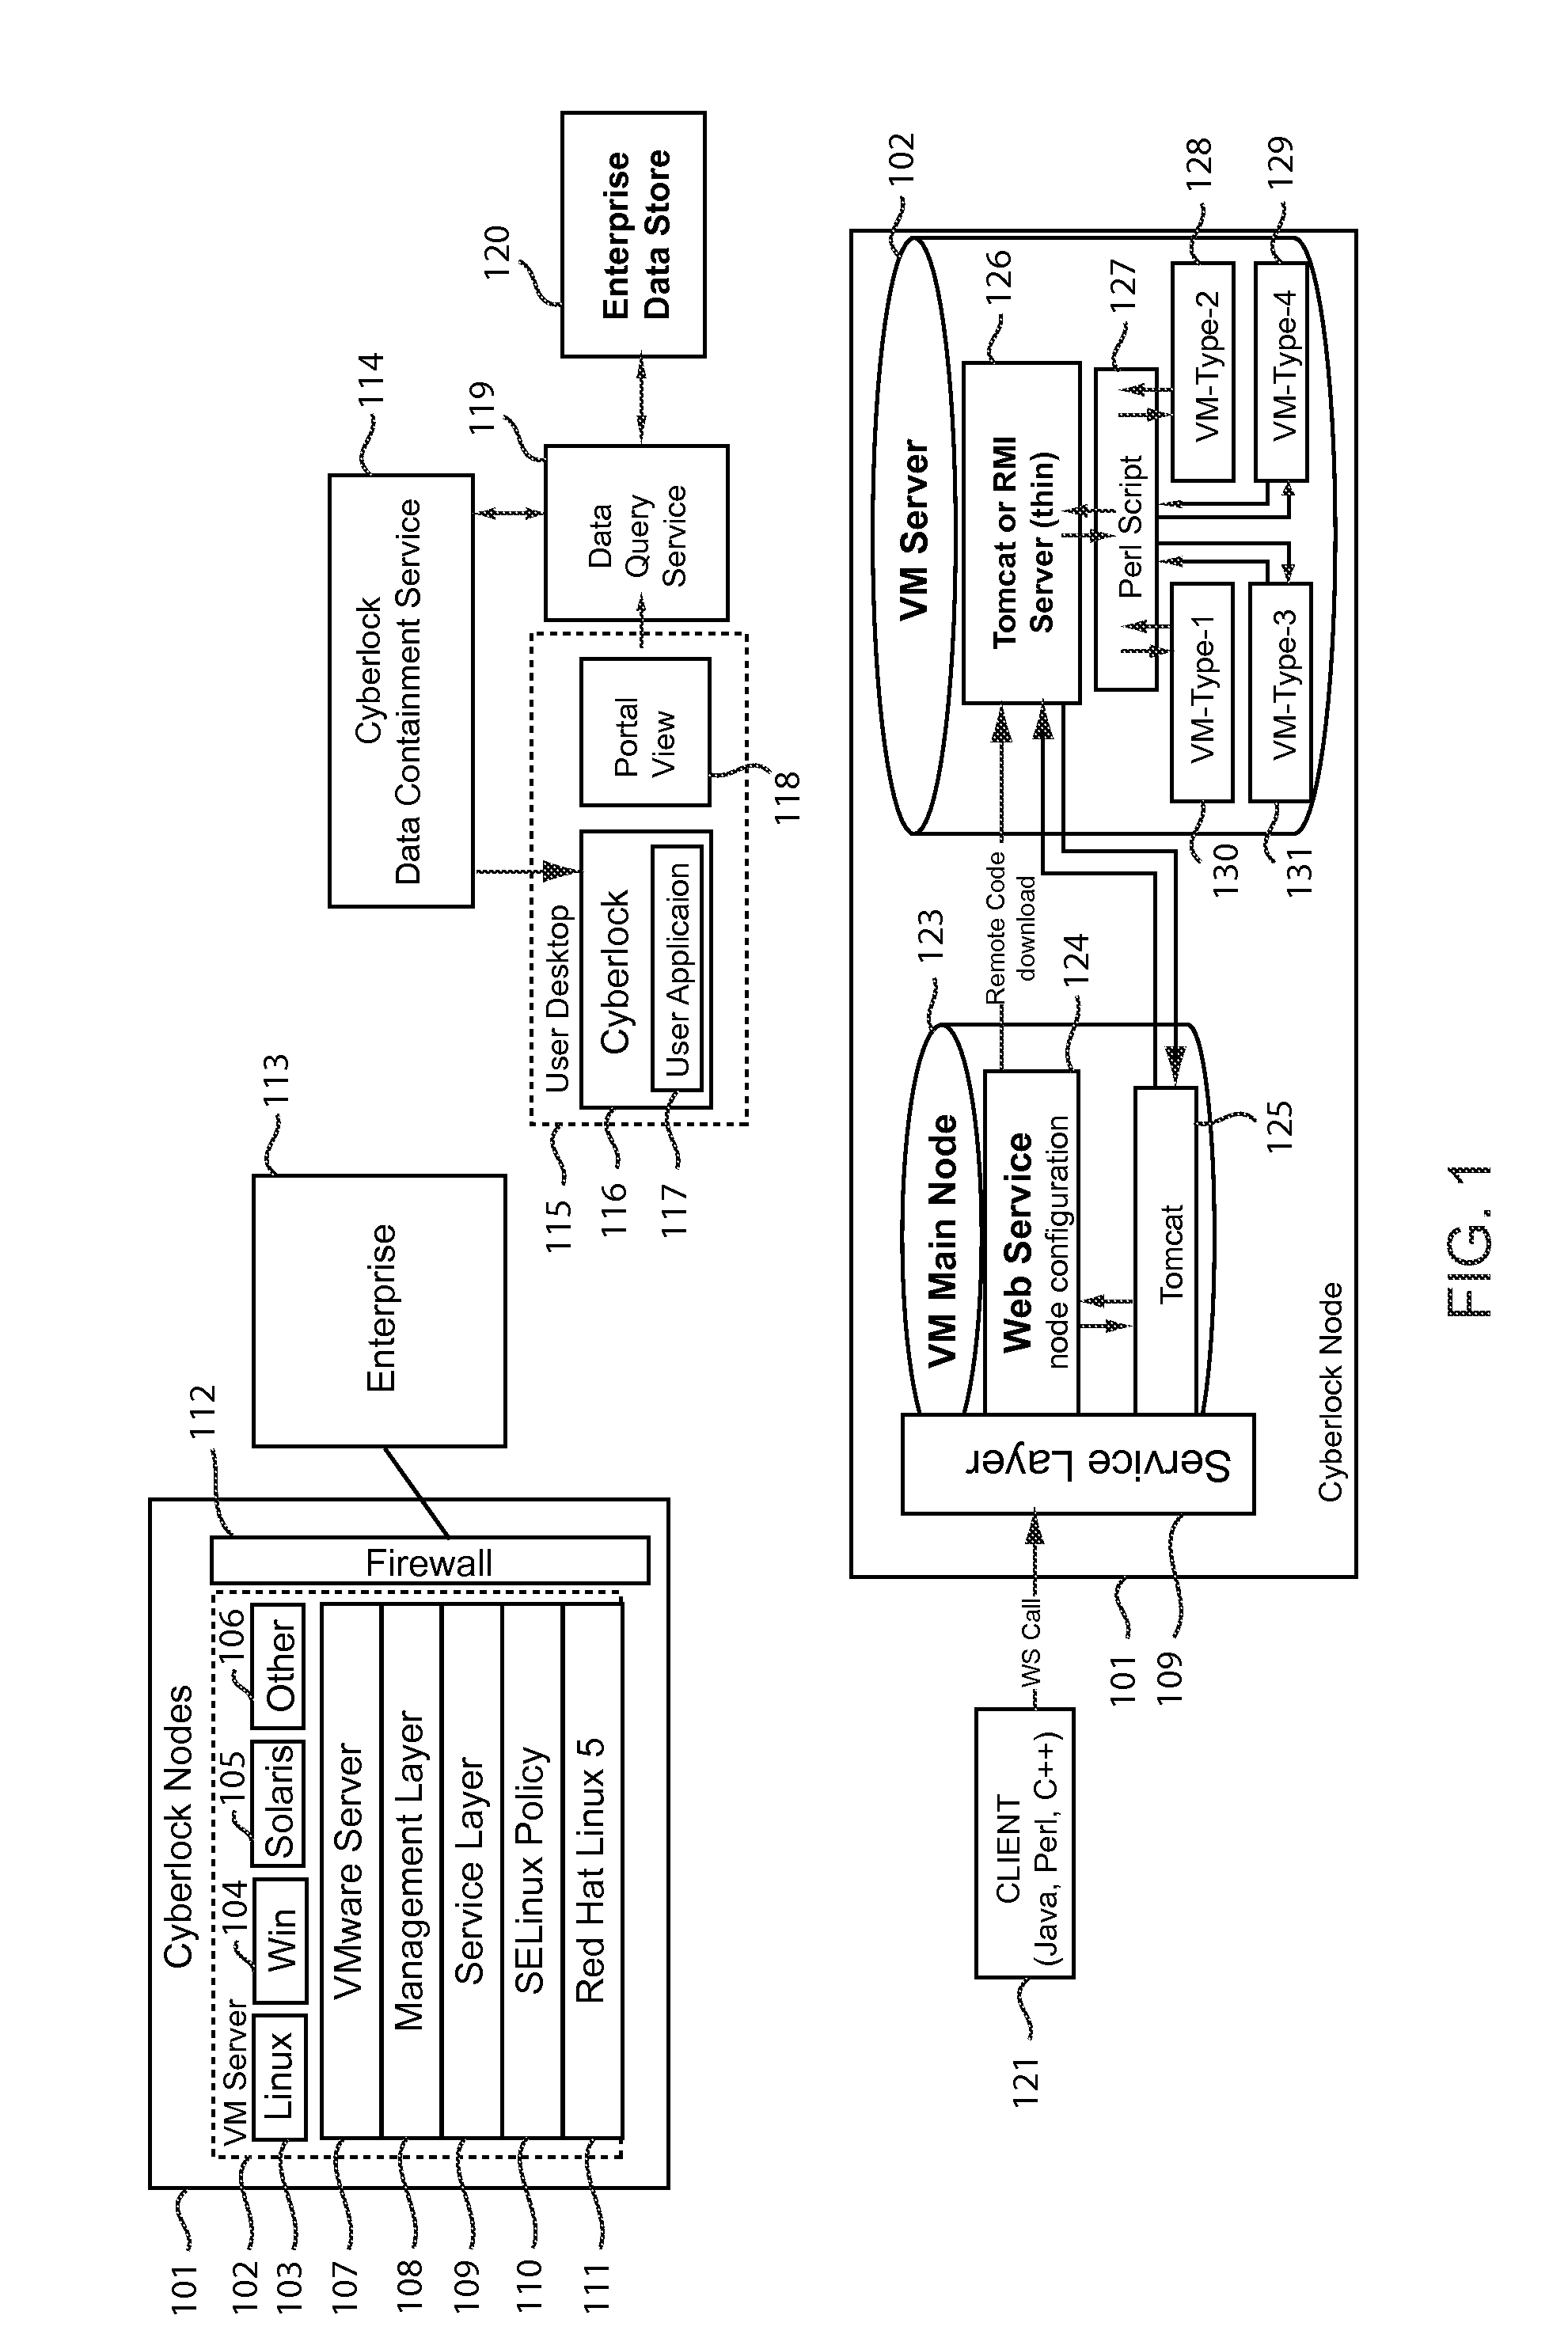 System and method for providing a virtualized secure data containment service with a networked environment